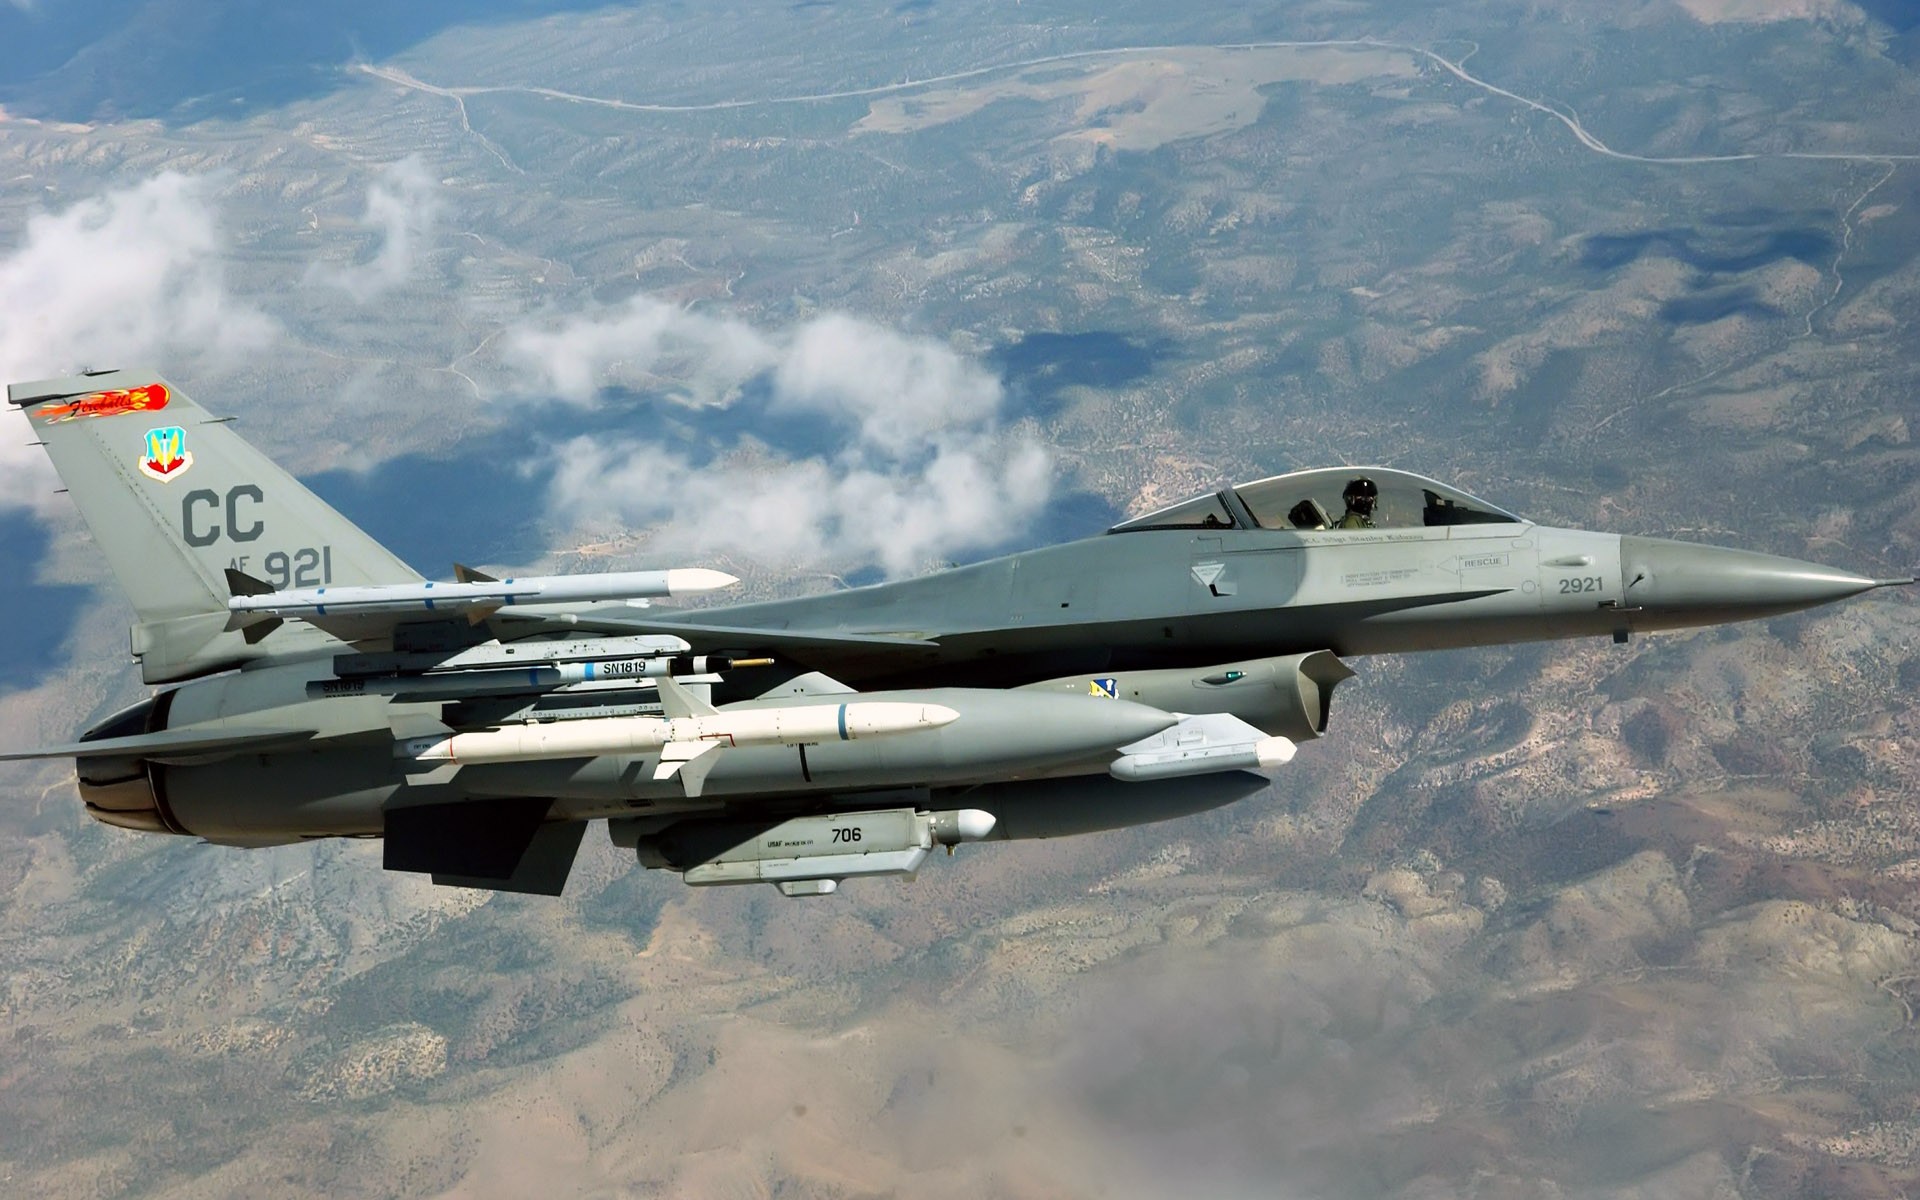 General 1920x1200 General Dynamics F-16 Fighting Falcon military aircraft aircraft vehicle military vehicle US Air Force jet fighter American aircraft pilot General Dynamics sky landscape clouds missiles